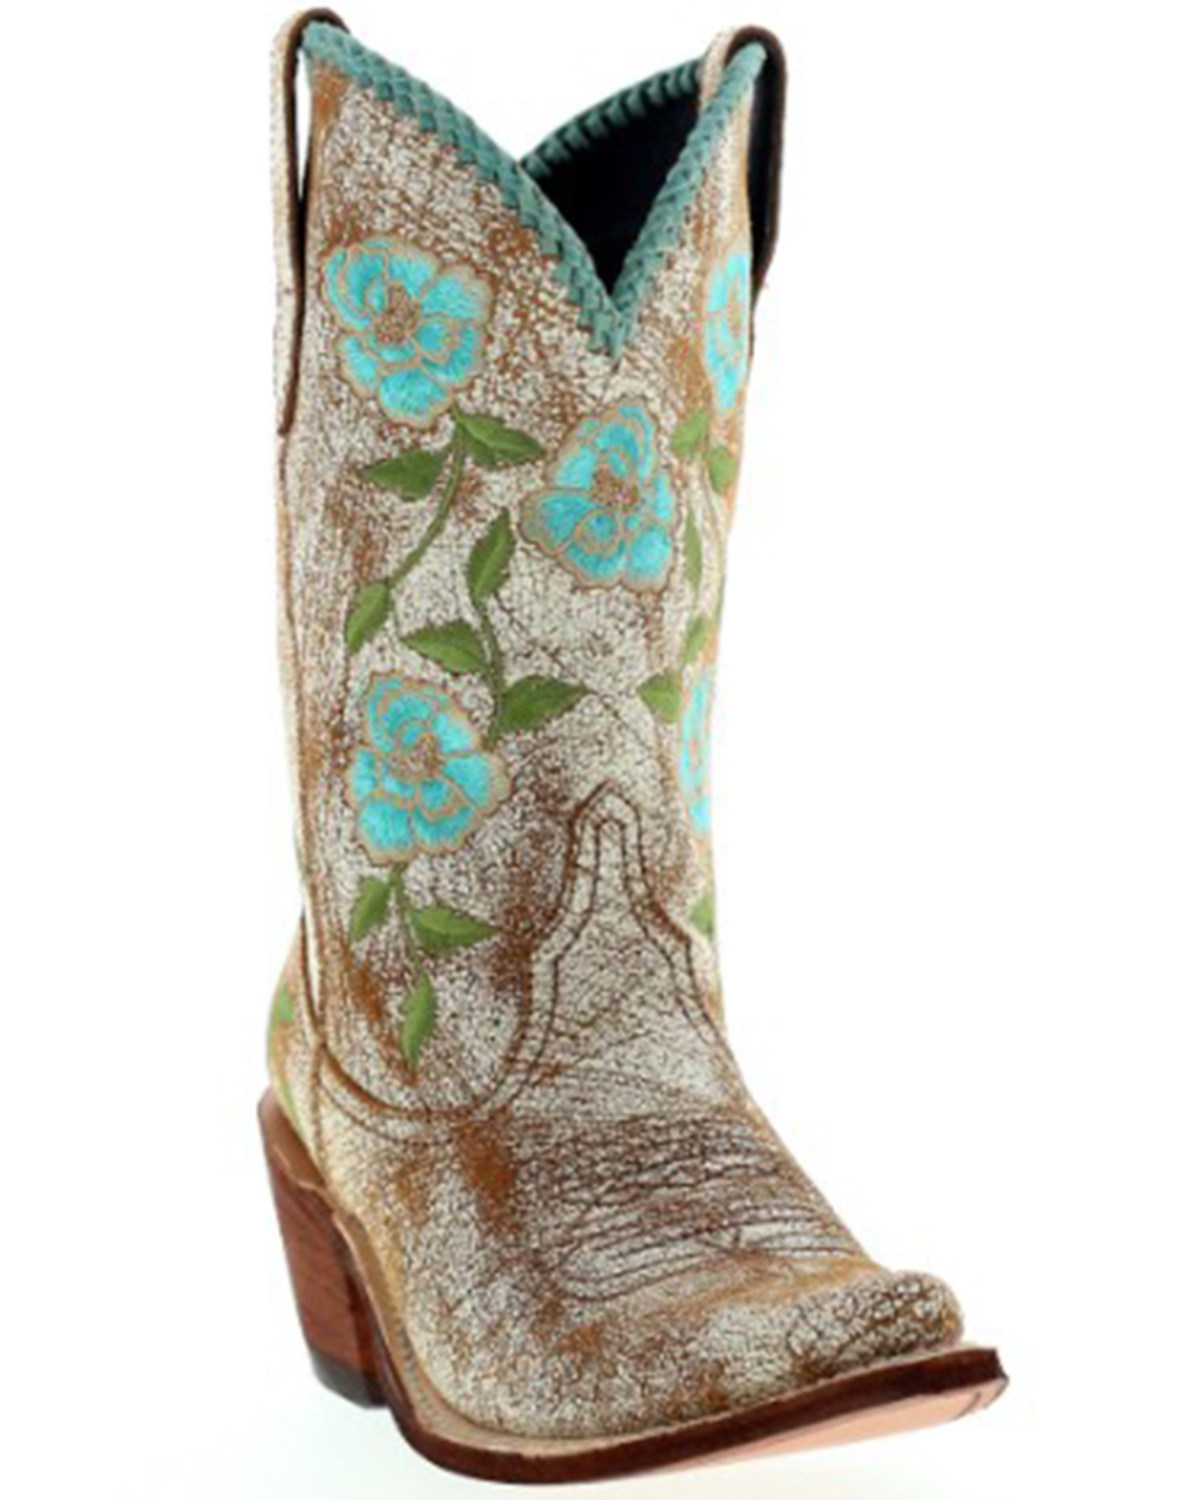 Liberty Black Women's Nina Rose Embroidered Western Boot - Round Toe